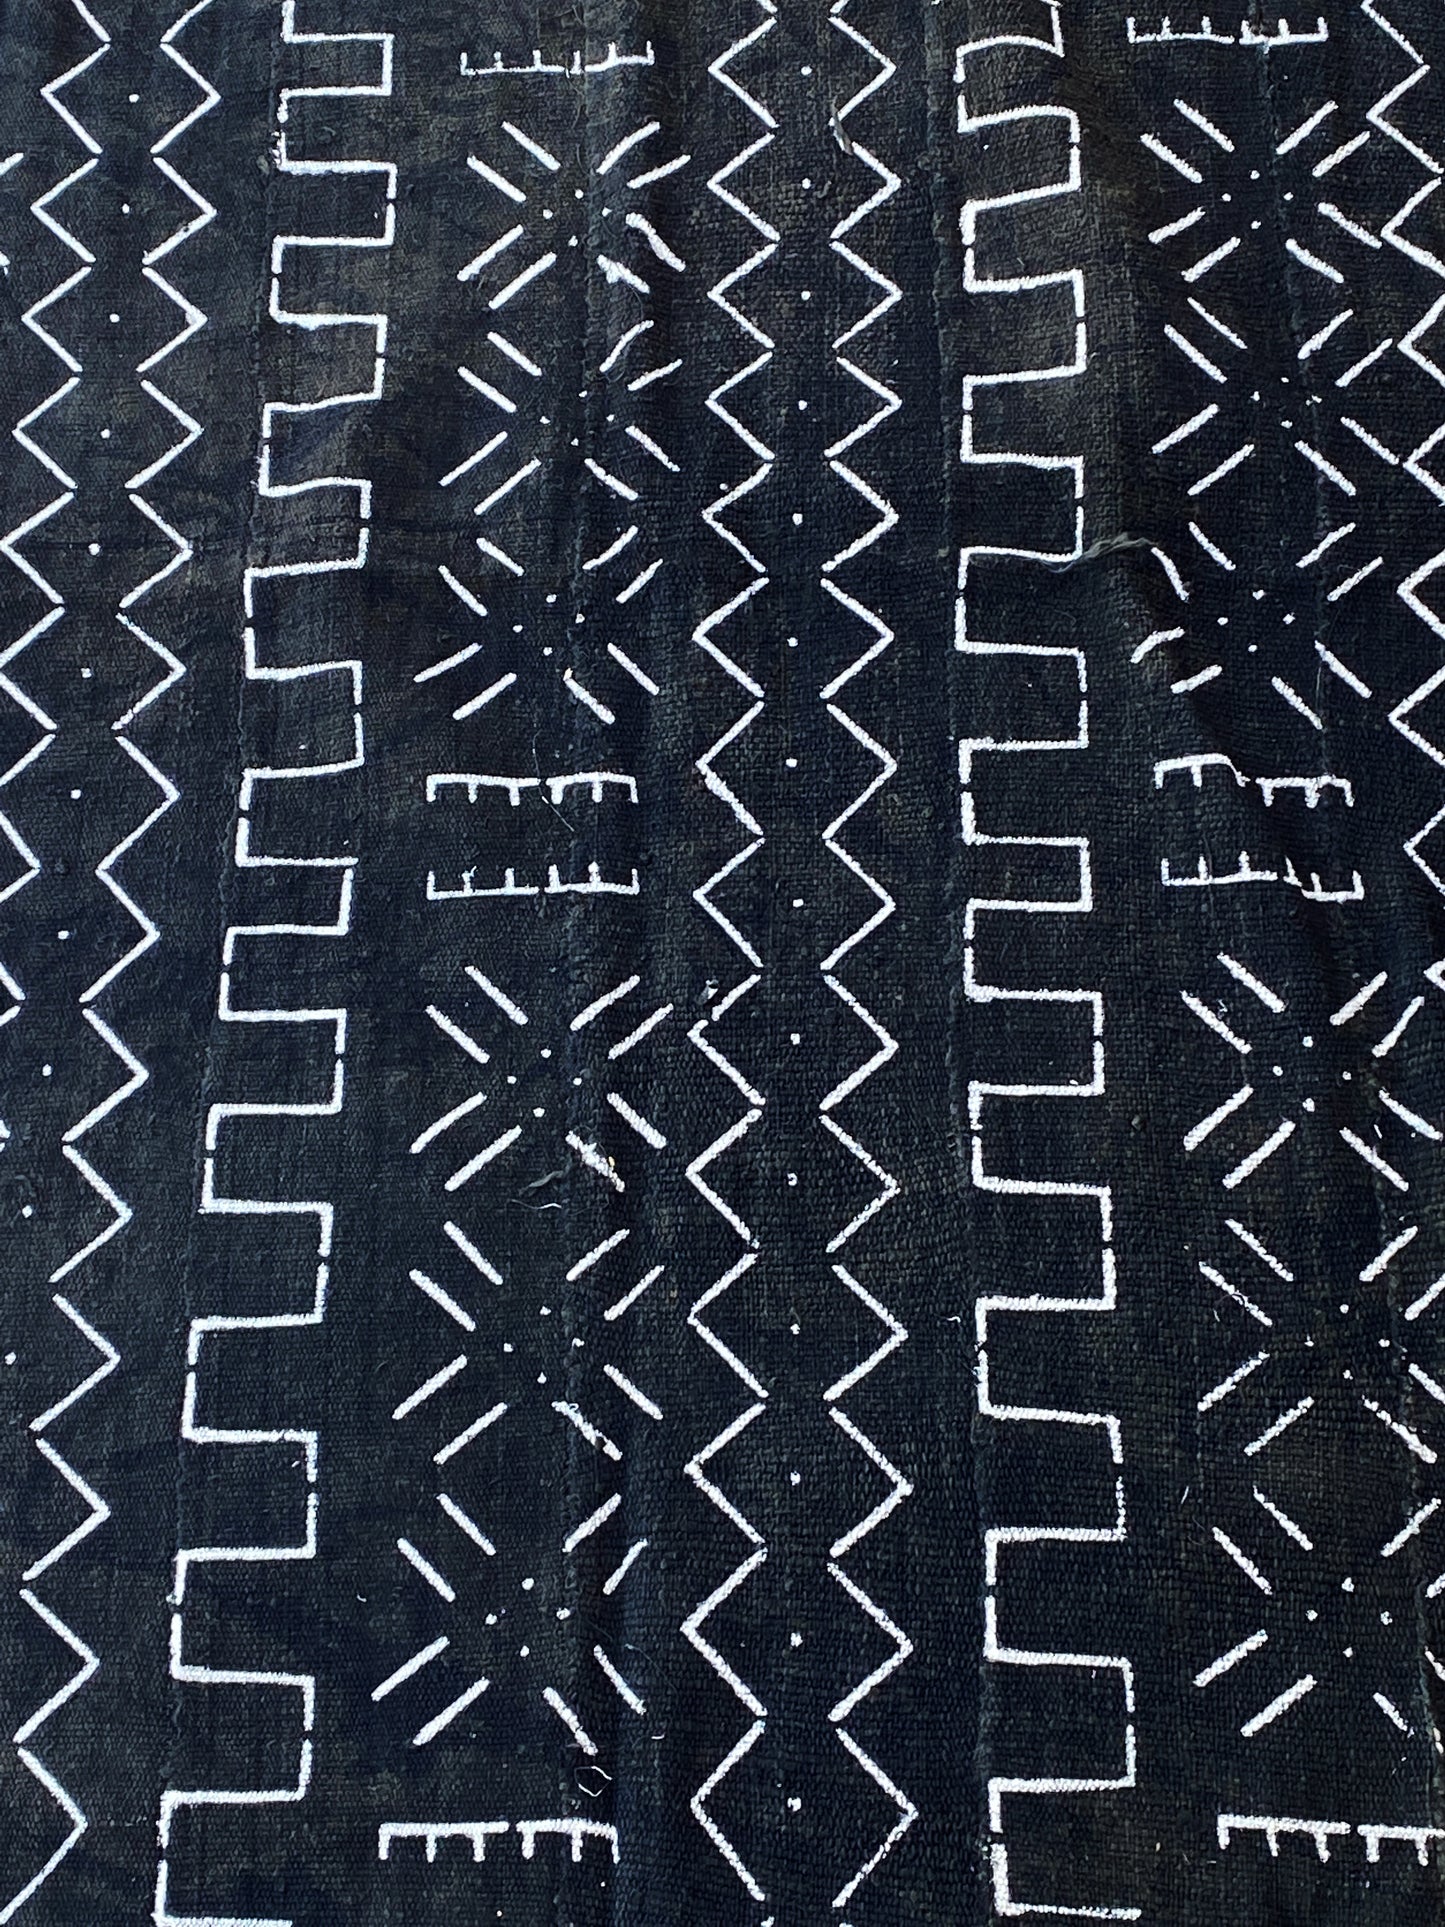 # 3858 African Black and White Mud Cloth Textile Mali